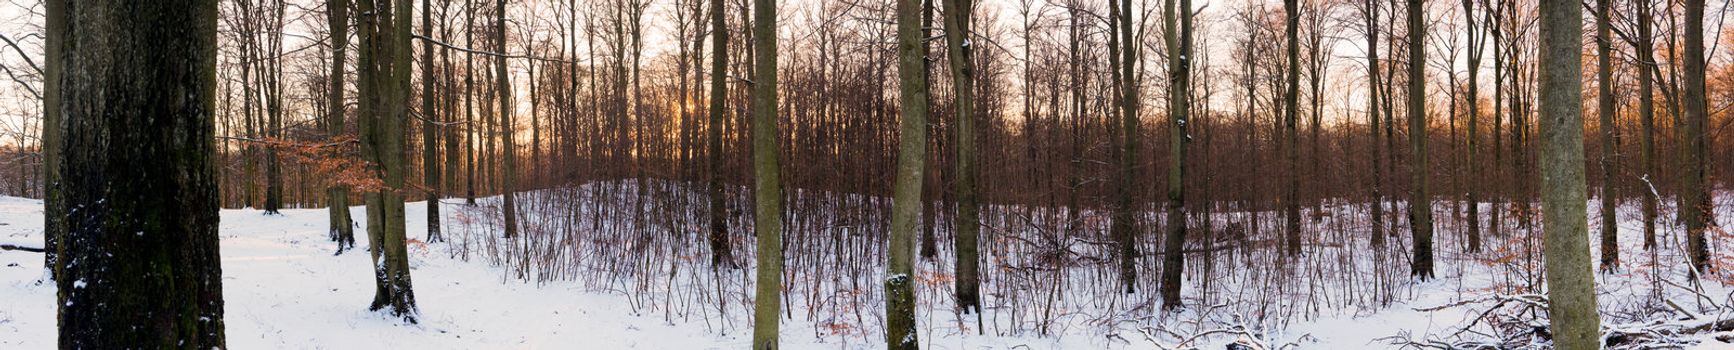 High-resolution panoramic view of a forest in winter